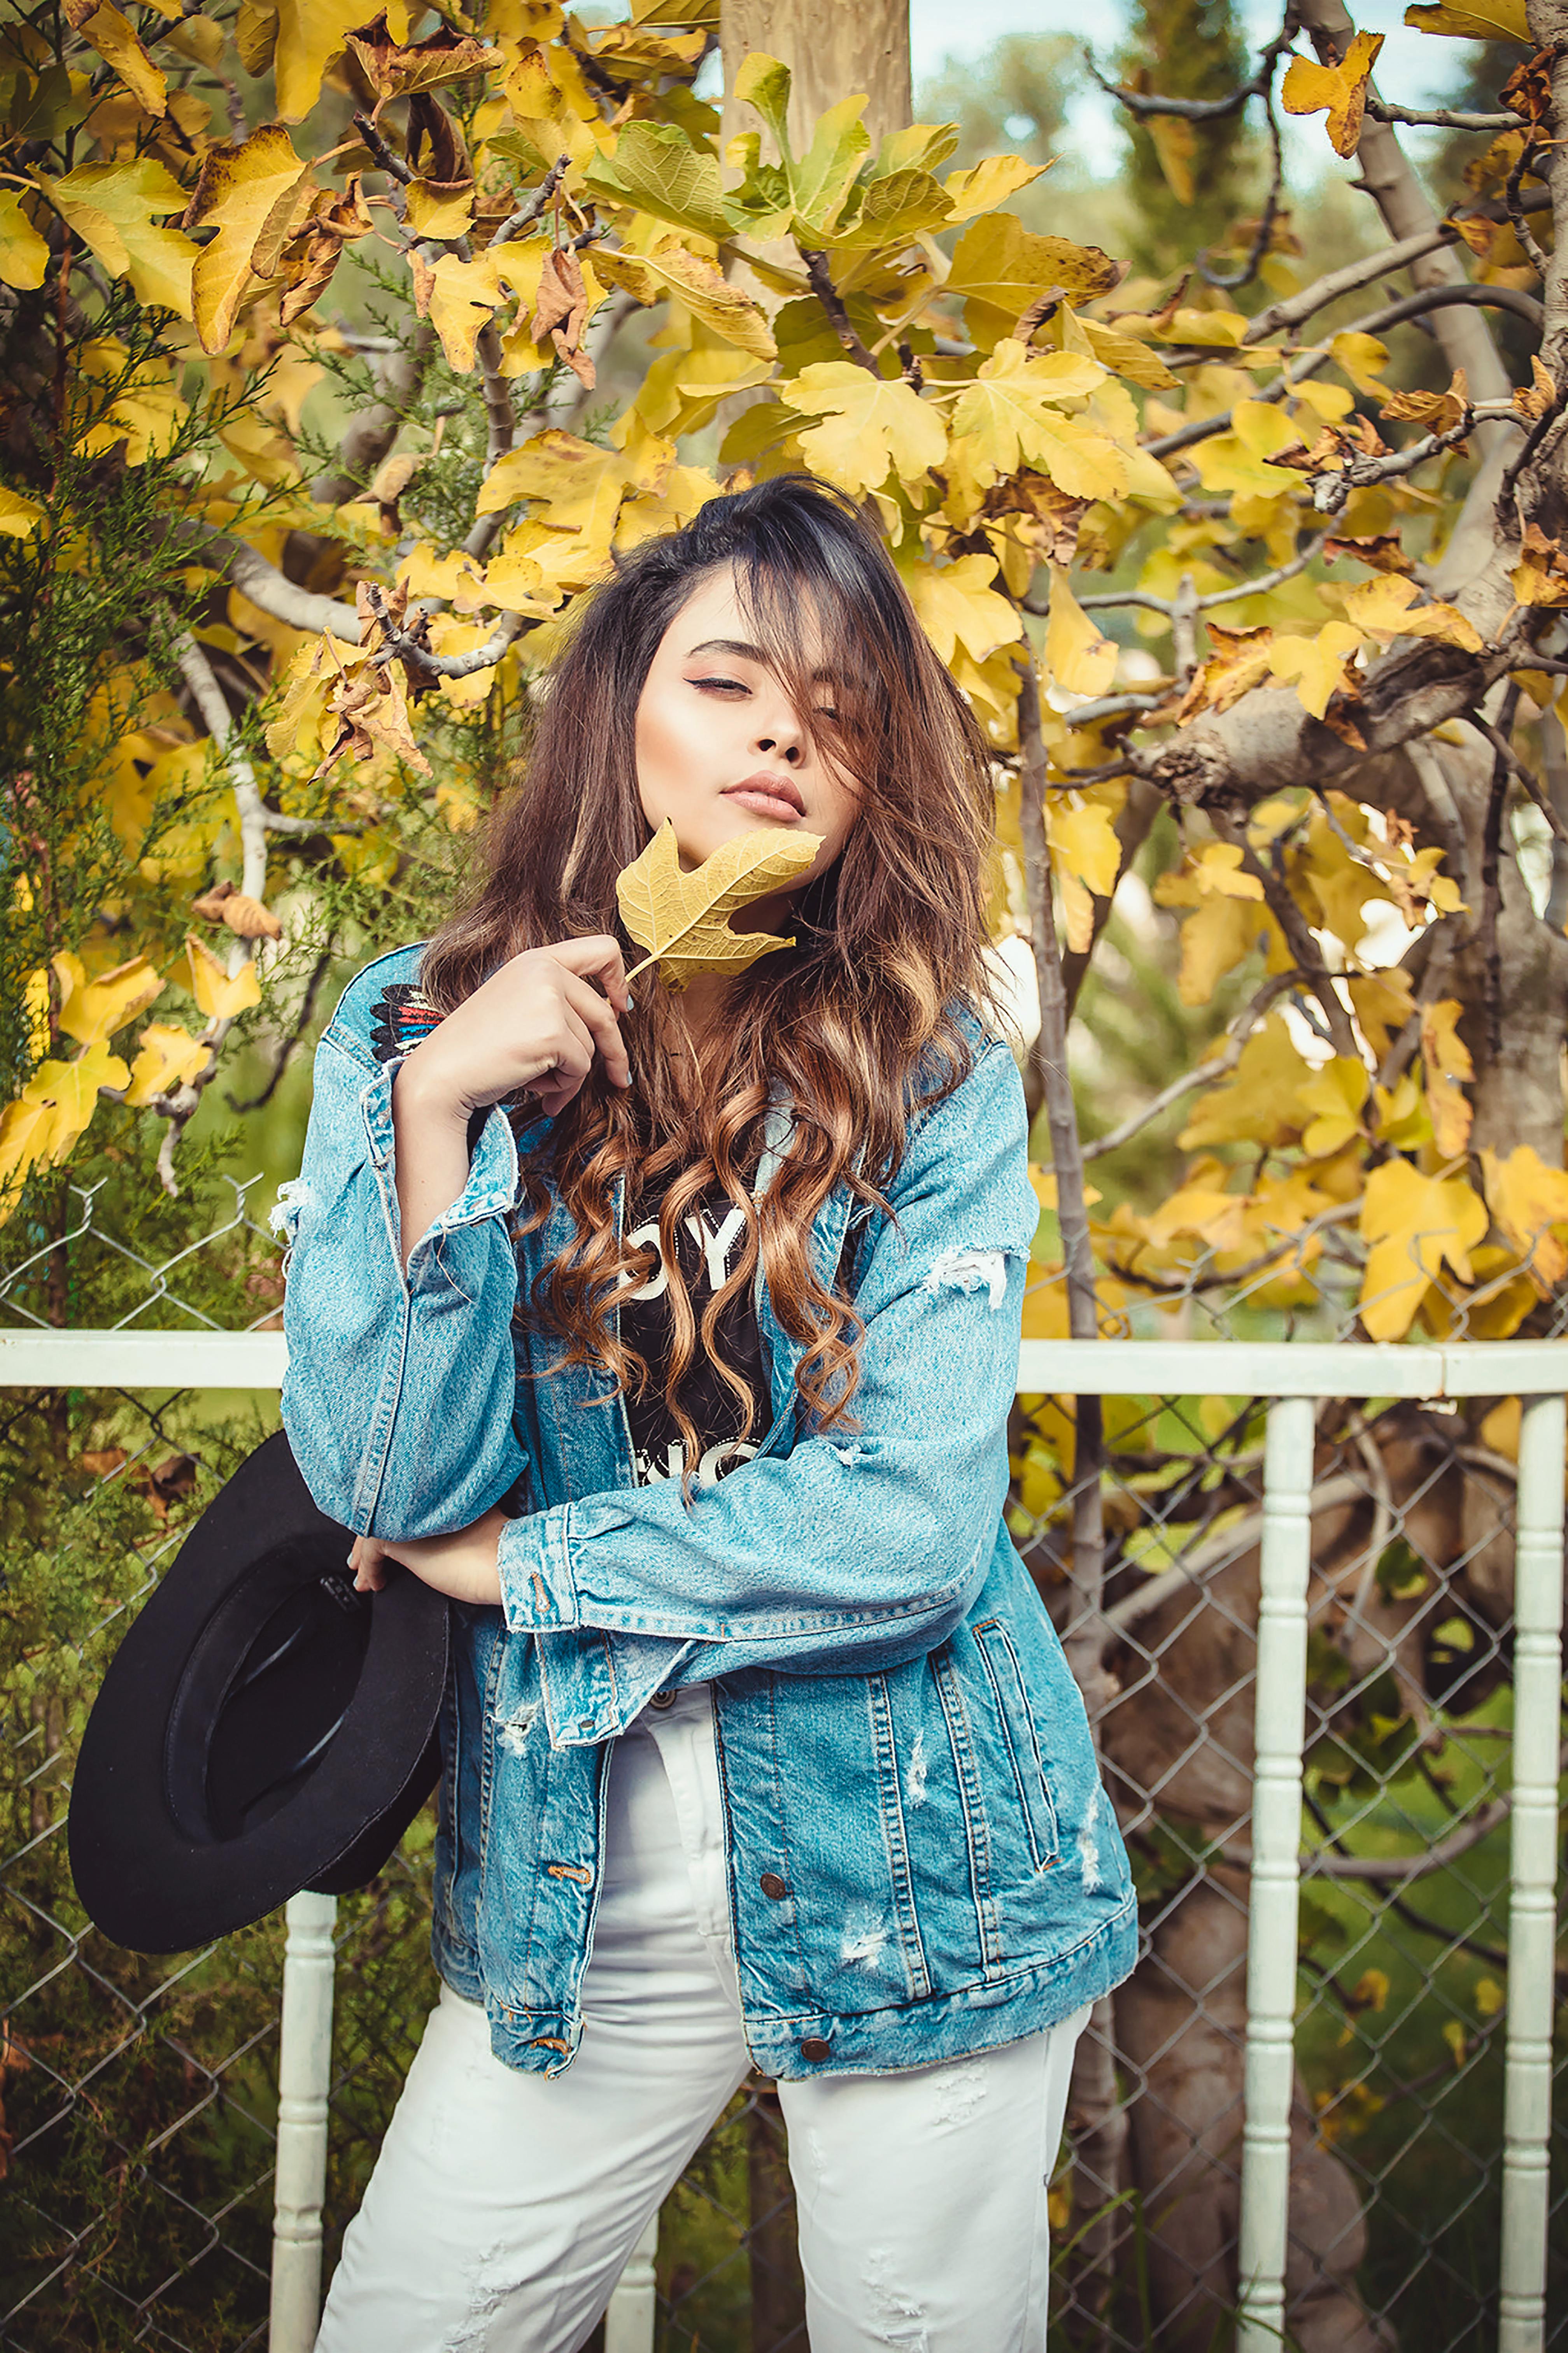 A woman in a denim jacket and jeans poses for a photo · Free Stock Photo